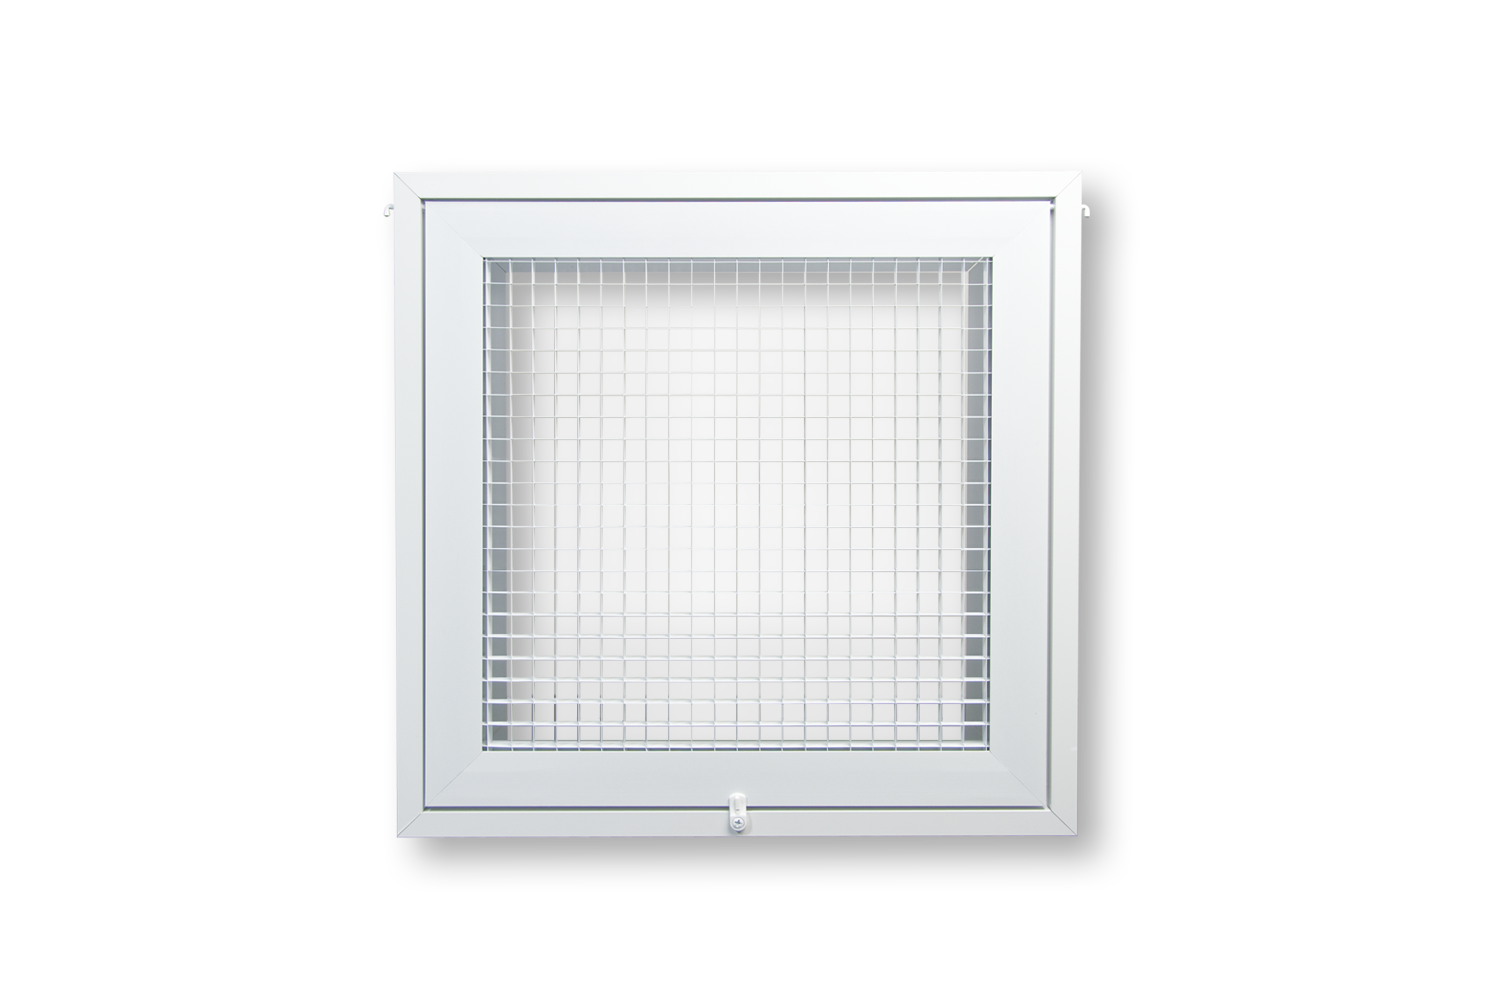 Dayus White DARE5-FG Eggcrate Cube Core filter Grille Ceiling 1"